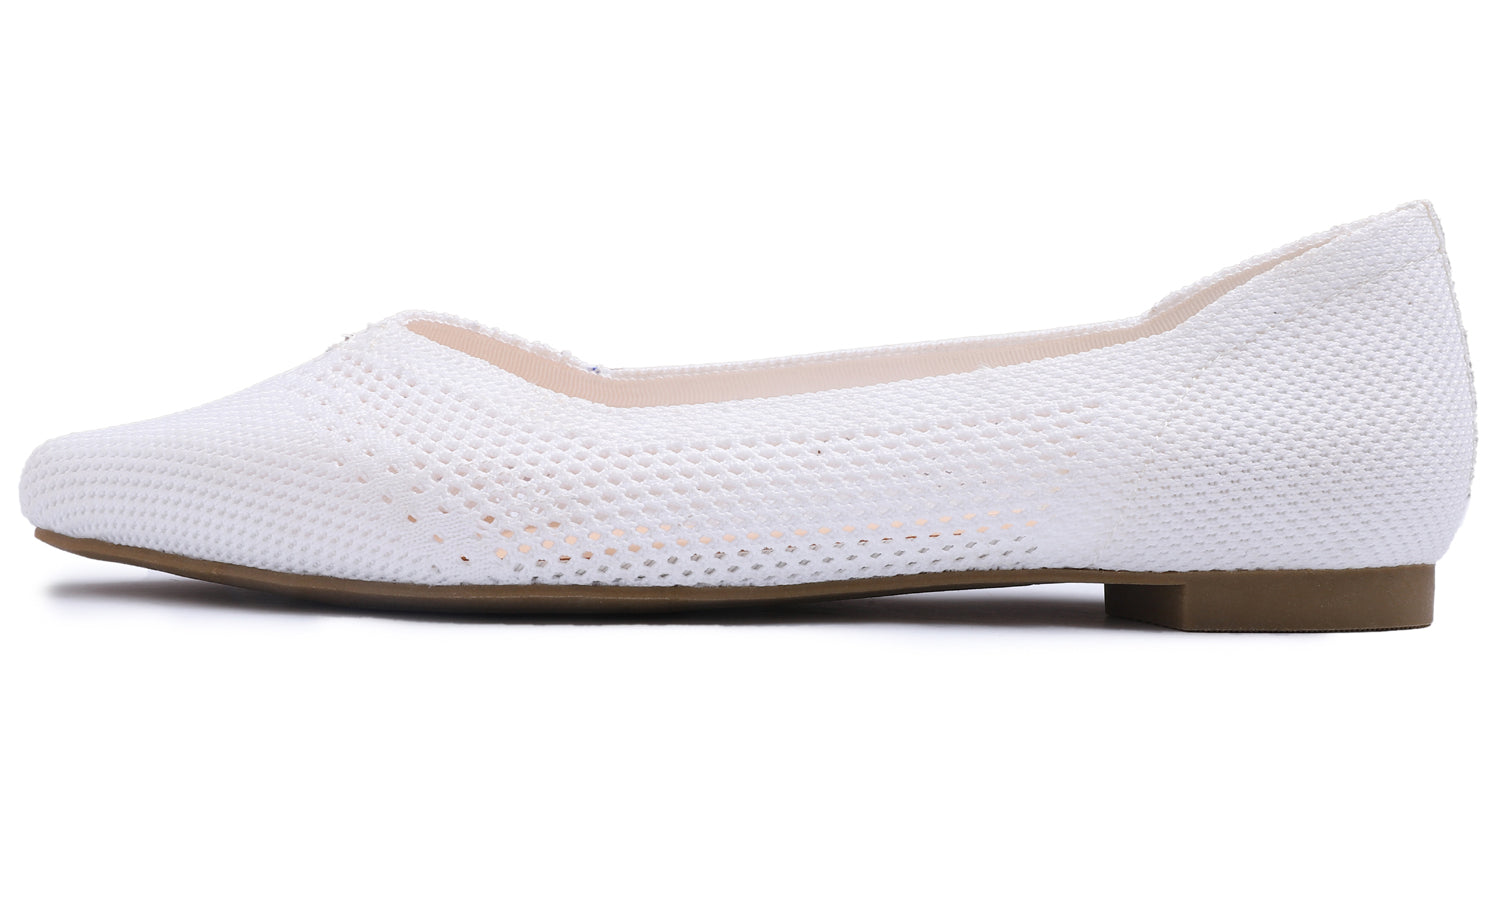 Feversole Women's Woven Fashion Breathable Knit Flat Shoes Pointed White